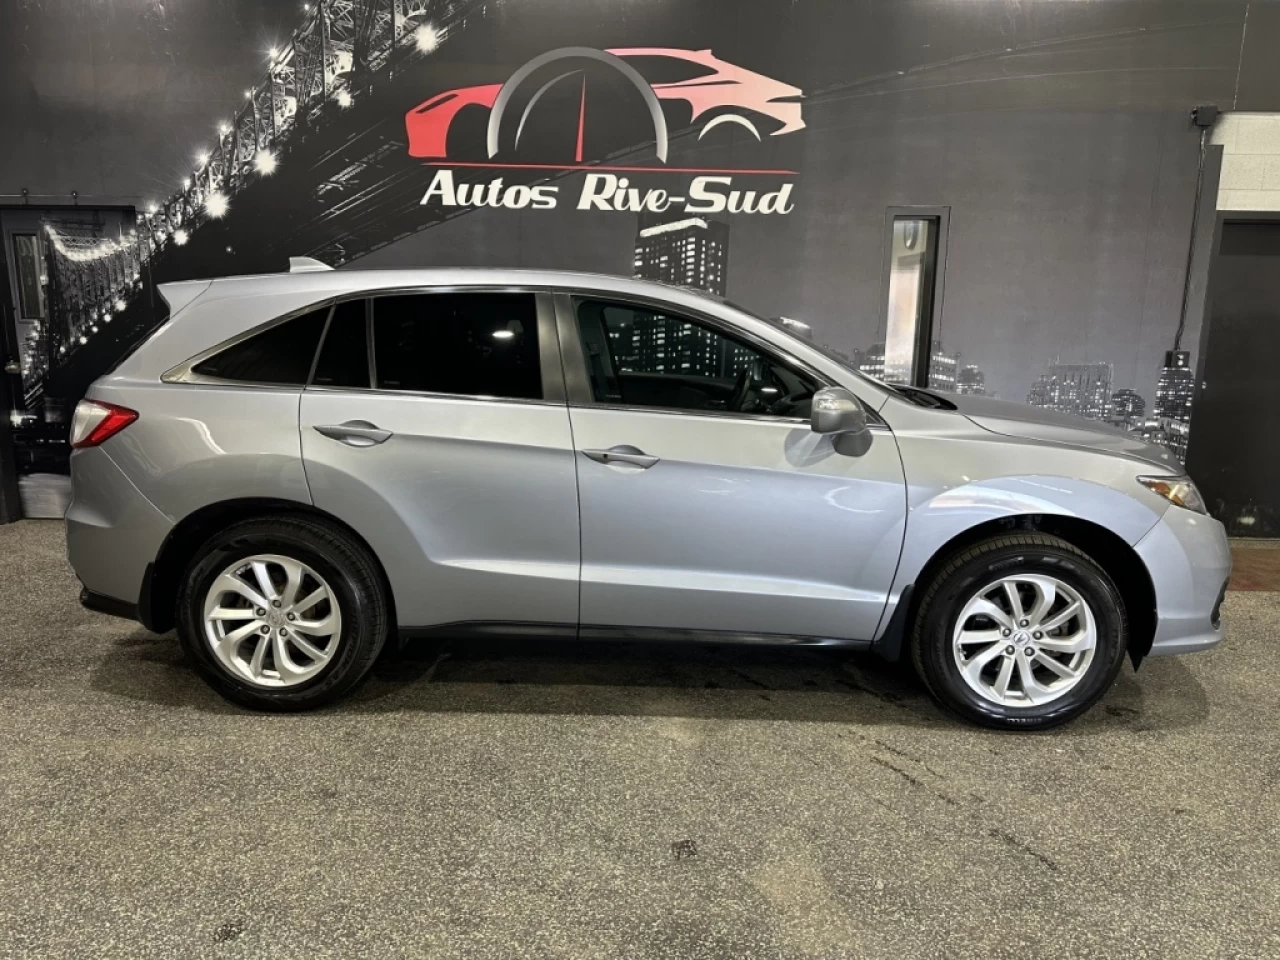 2016 Acura RDX TECH AWD FULL CUIR TOIT SEULEMENT 111 6000KM Image principale